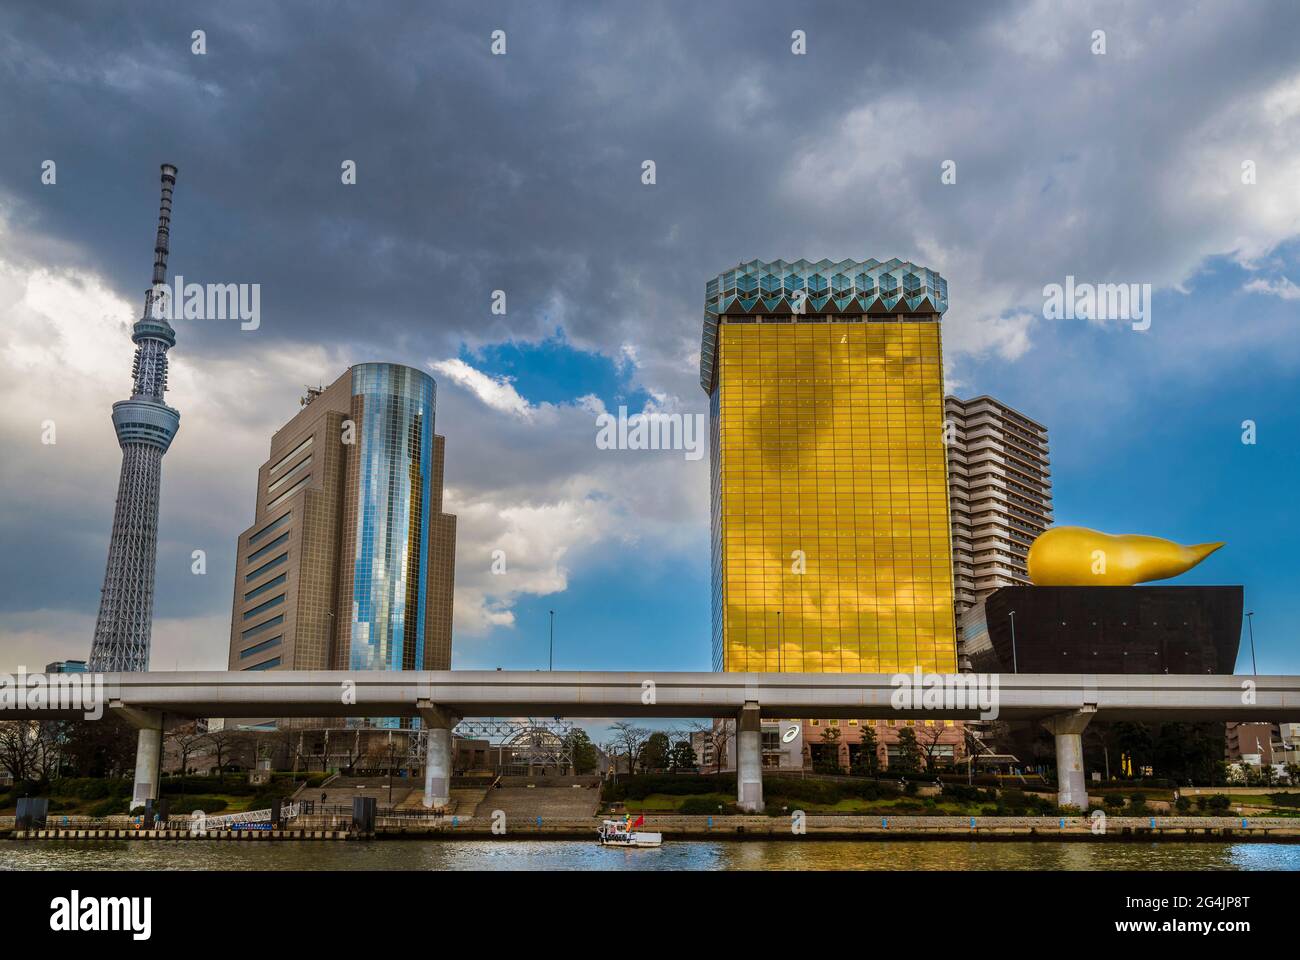 View of Sumida District with the iconic Asahi Beer Hall buildings, Skytree Tower and stormy clouds Stock Photo